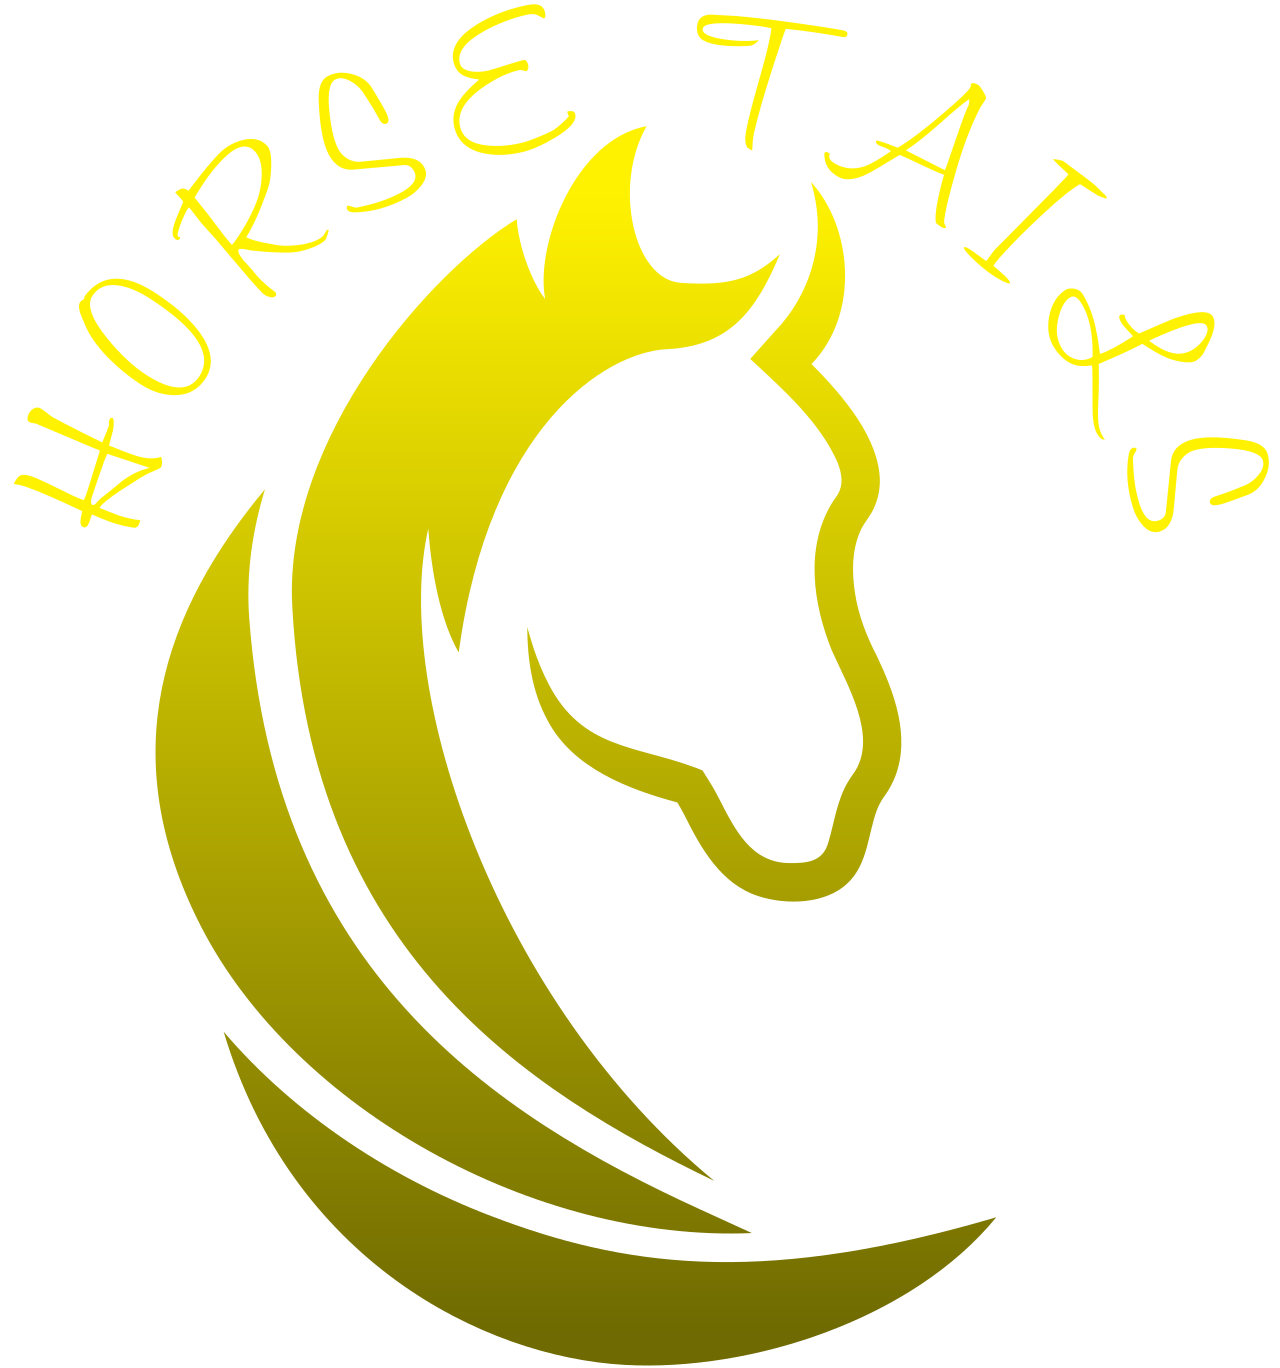 HORSE TAILS's logo